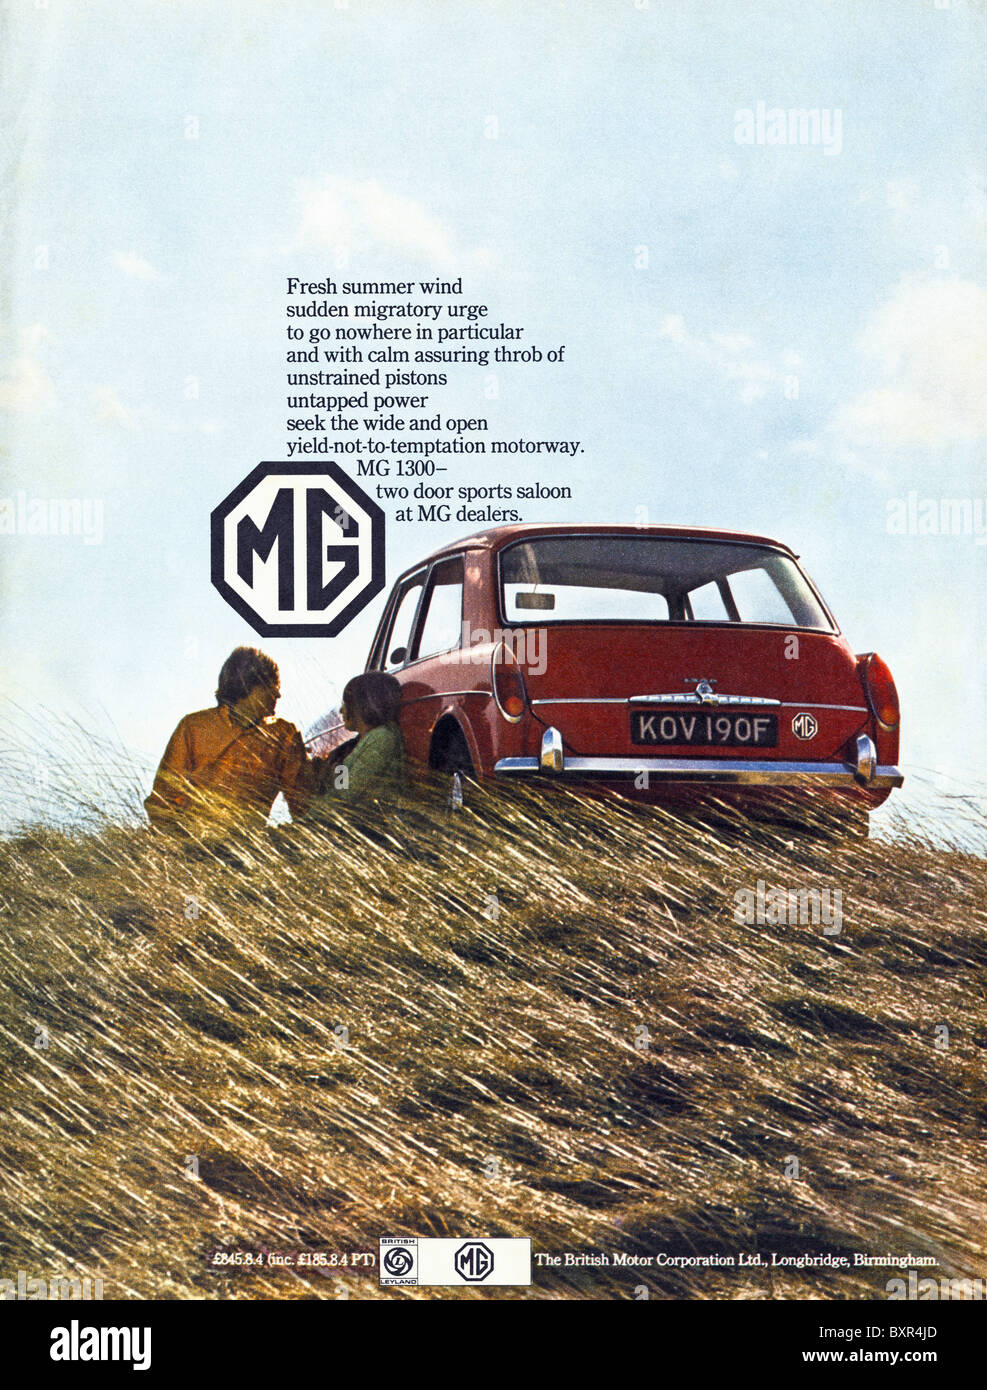 MG 1300 2 door sports saloon car full page advertisement in magazine colour supplement circa 1969 Stock Photo